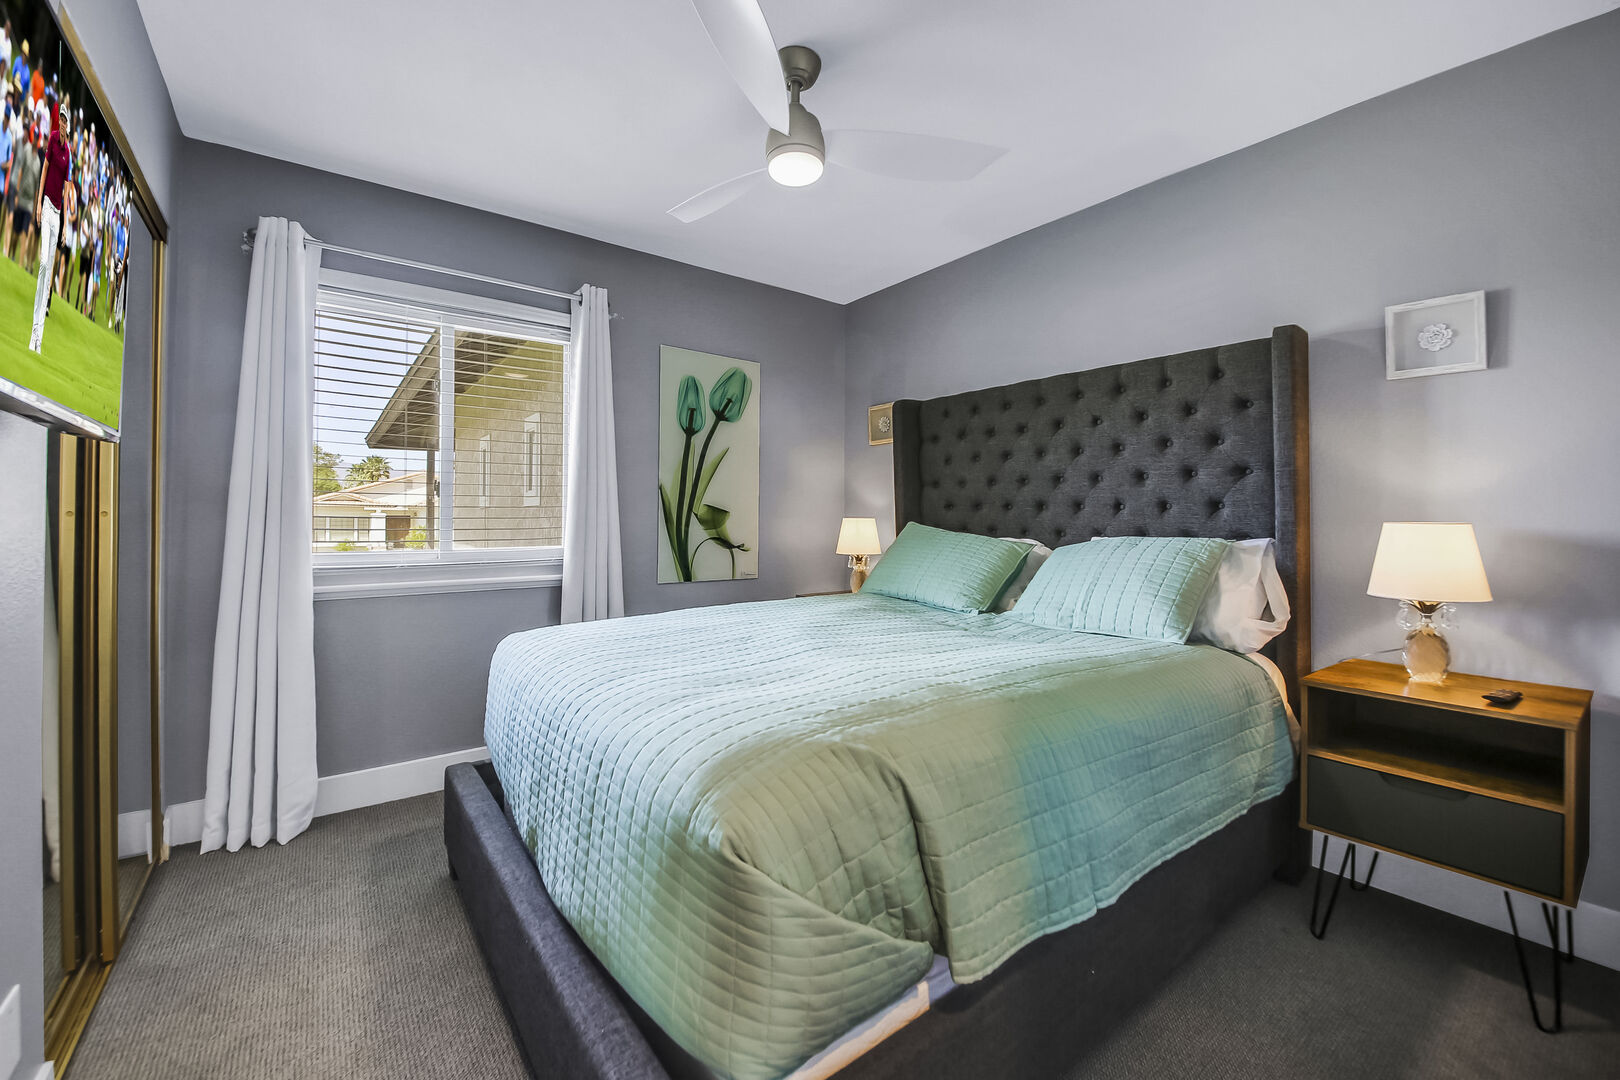 Bedroom 2 is located across from Master Suite 1 and features a King-sized Bed and a 41-inch Vizio Smart television.